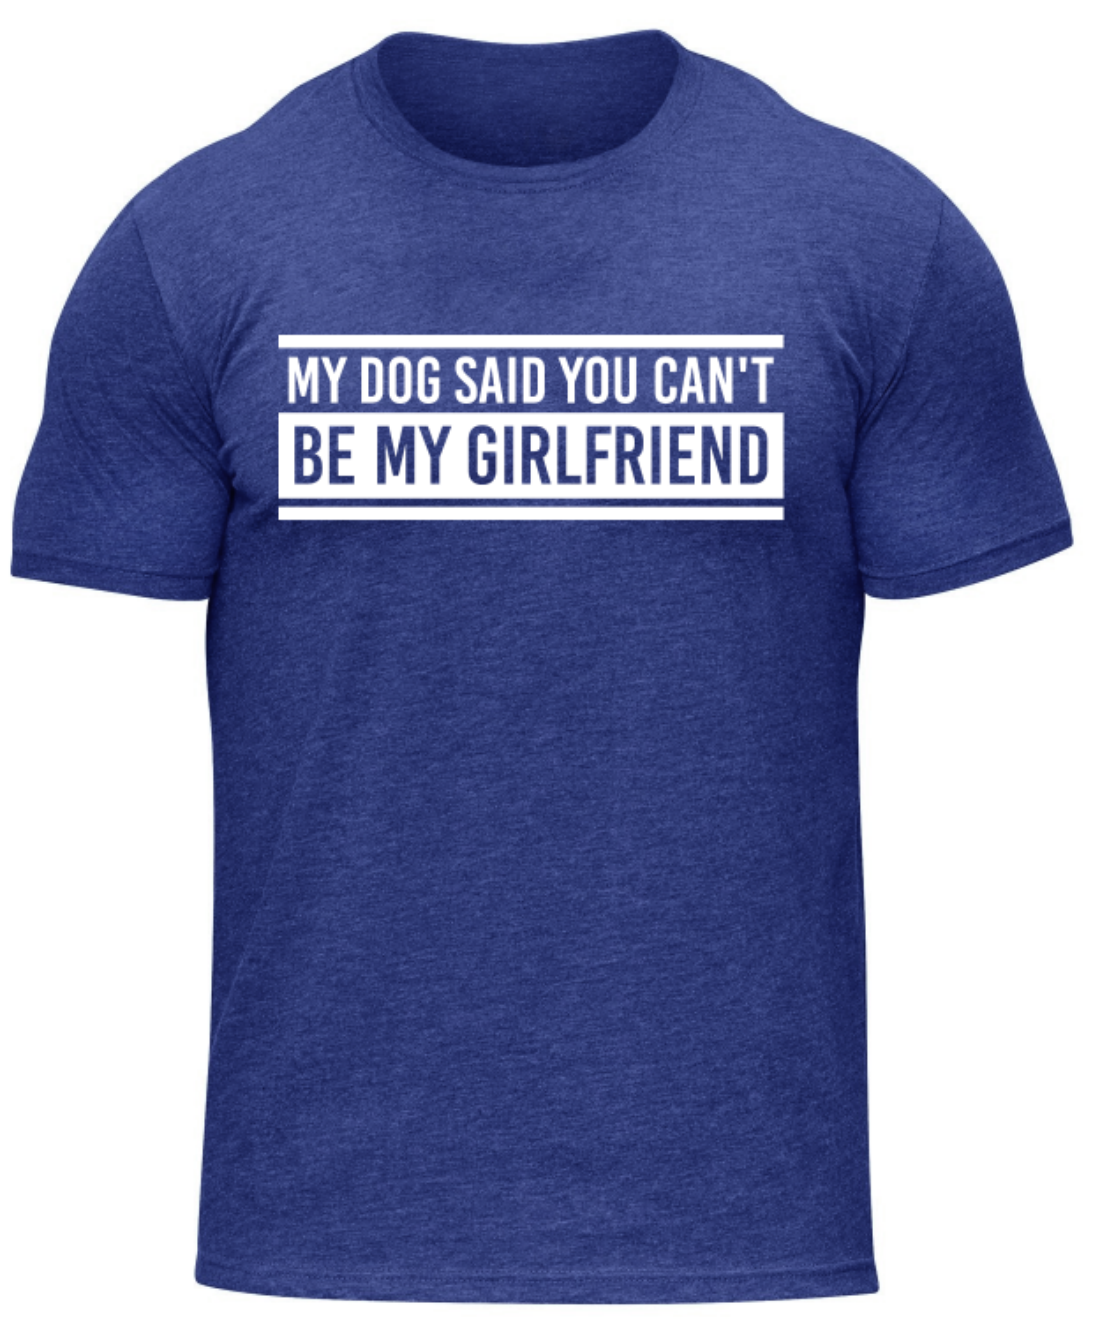 My Dog said You Can't Be My Girlfriend-Tee